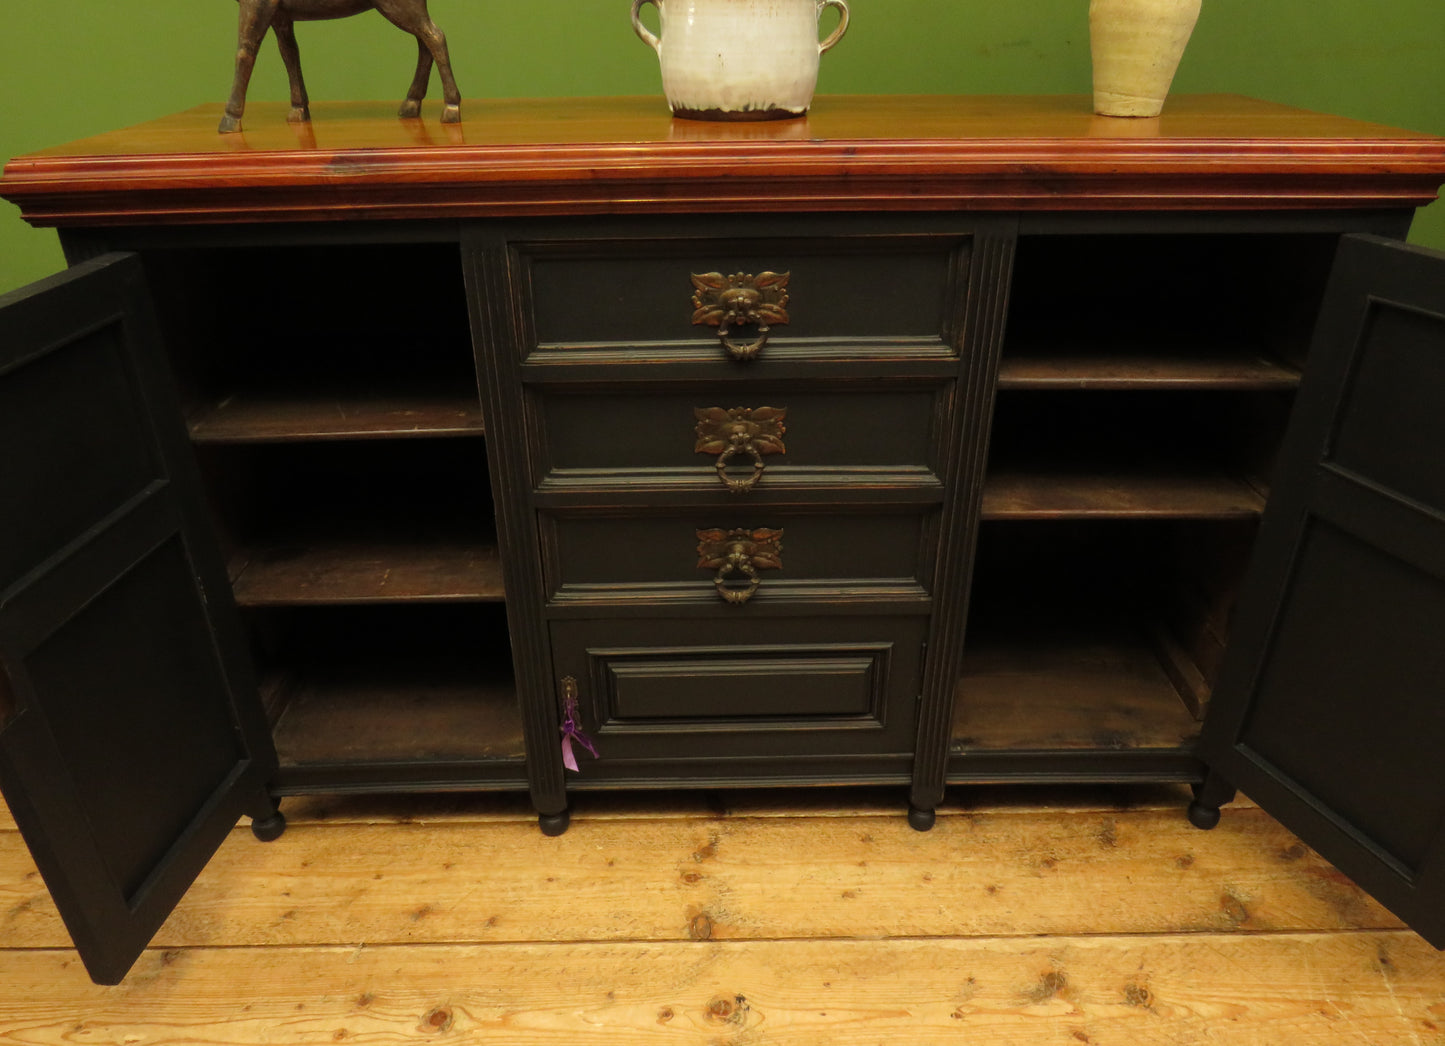 Large Antique Black Carved Sideboard with French Polished Top